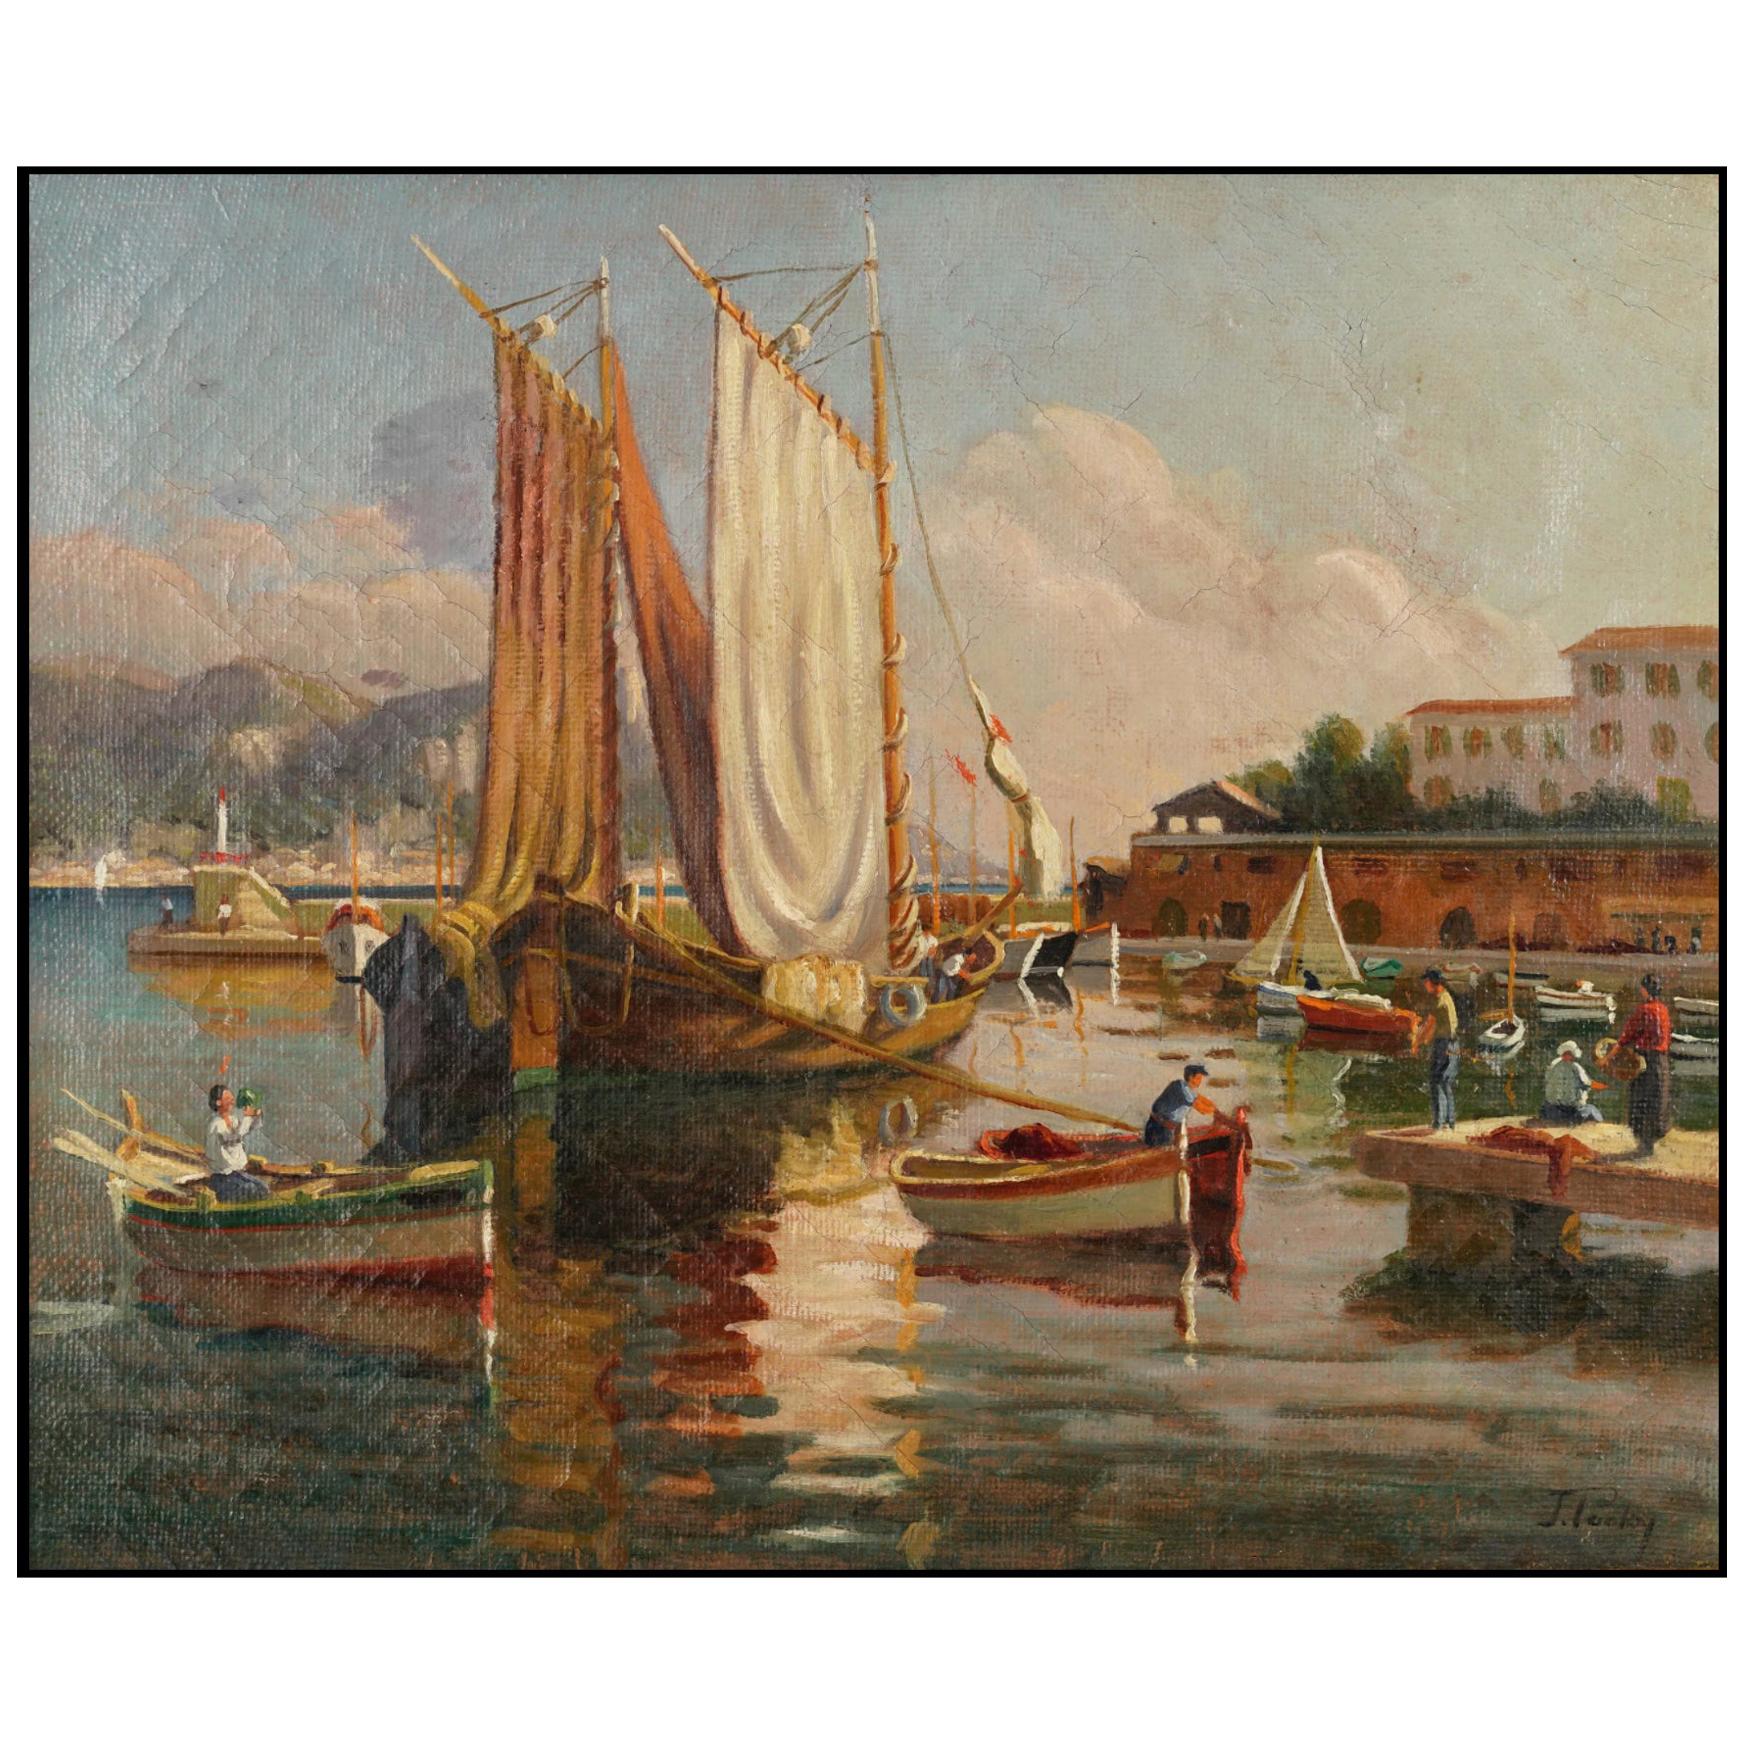 20th Century Painting "Saint Jean Cap Ferrat" Signed by F. Poufay For Sale